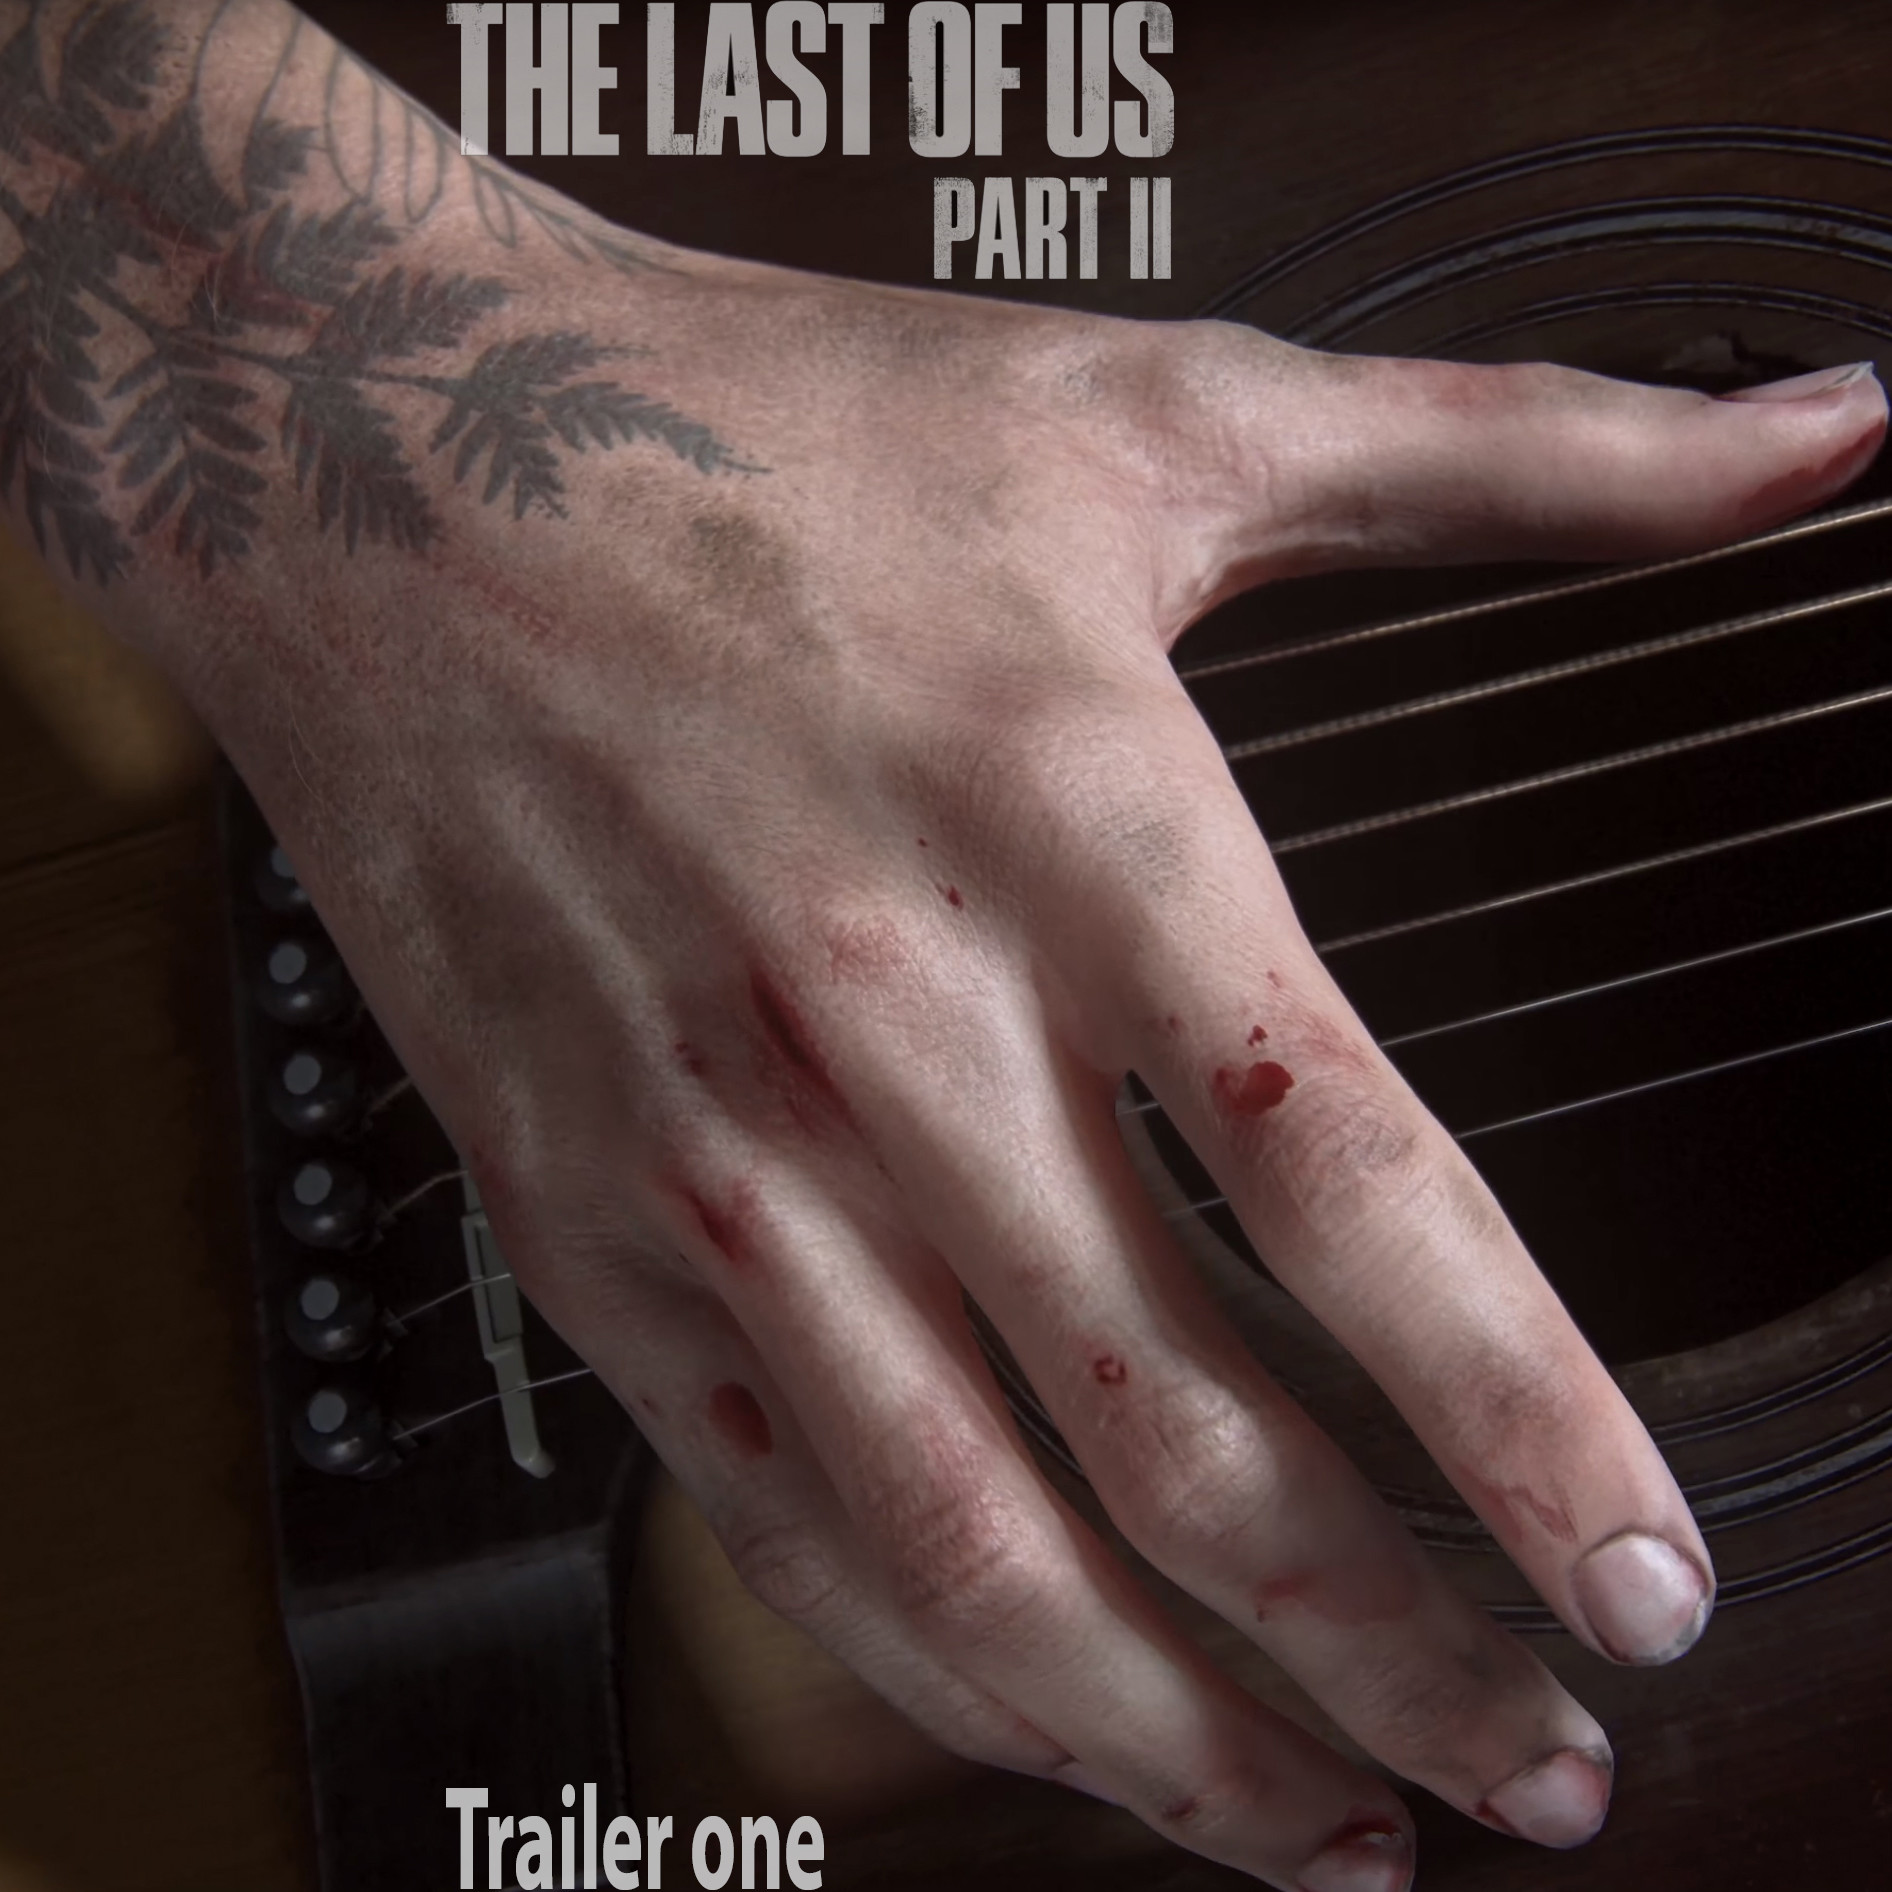 THE LAST OF US 2 Official Trailer (PS4) 